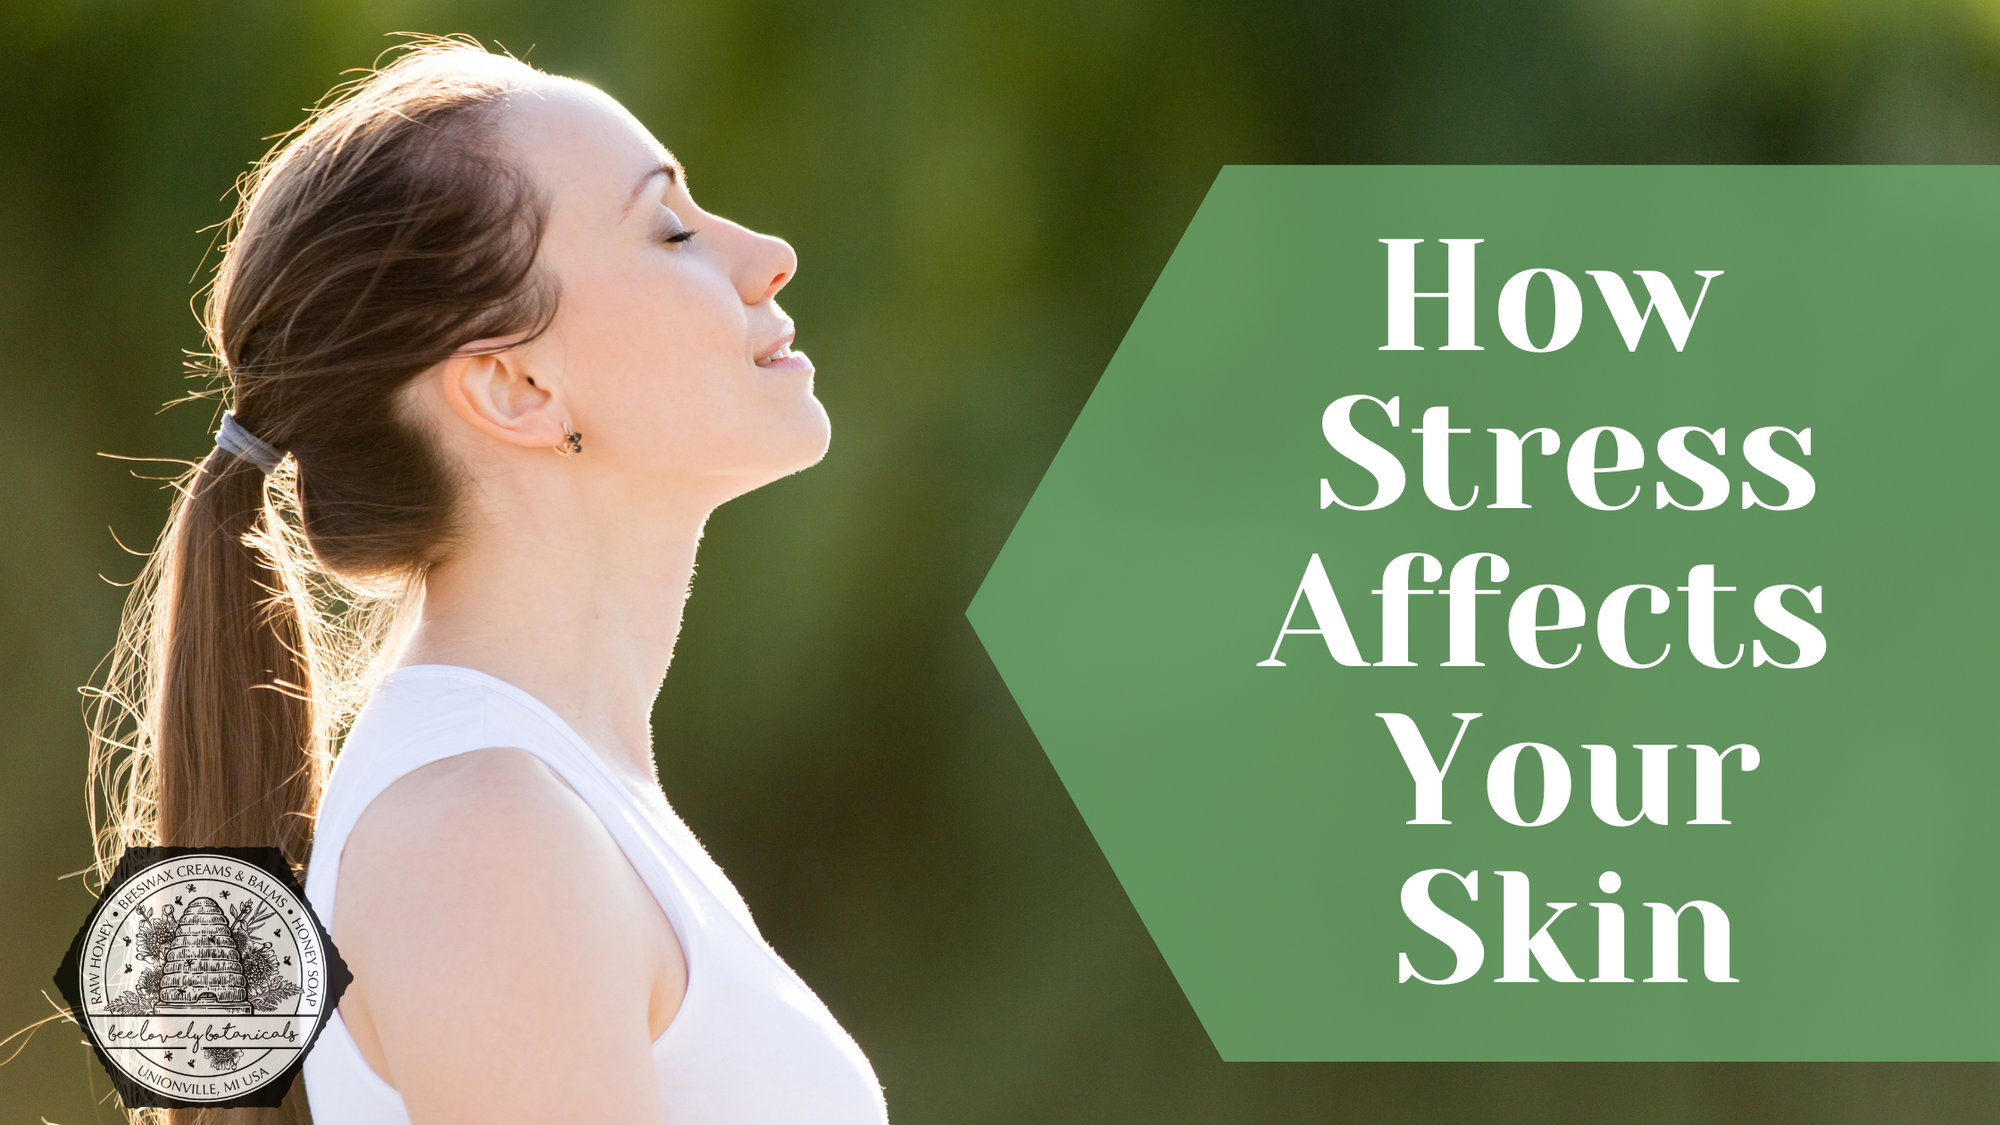 Stress is Affecting Your Skin